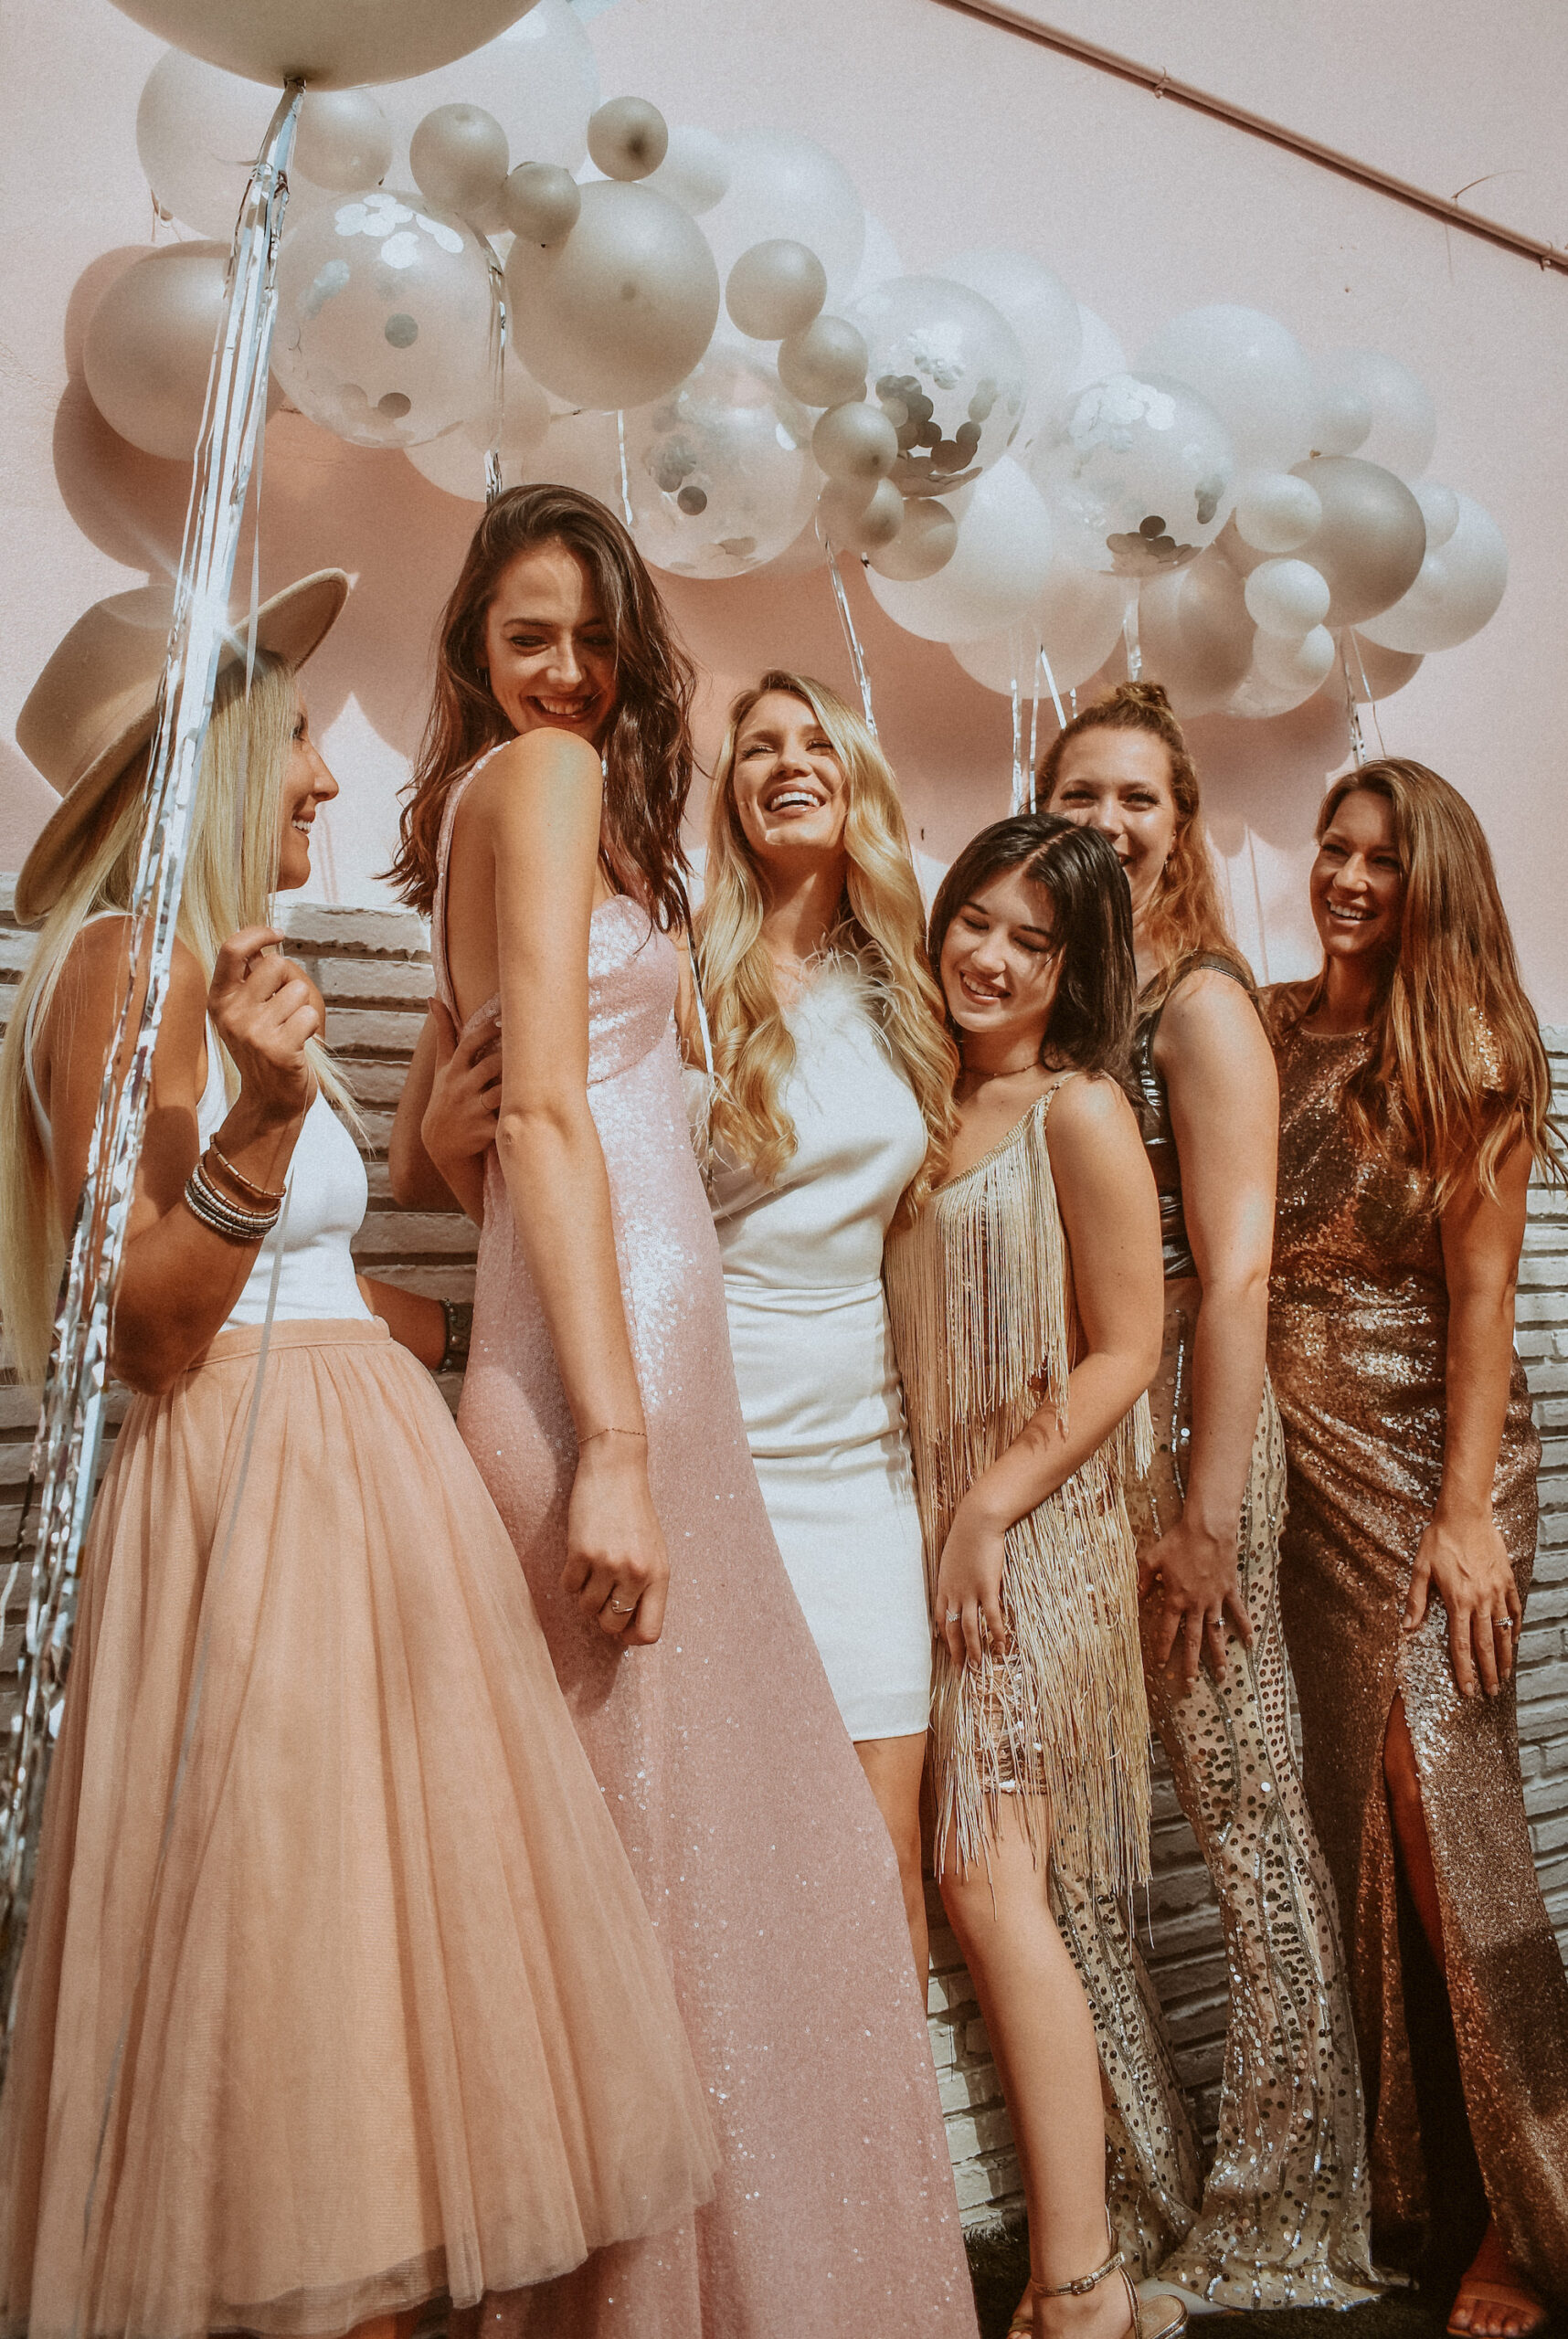 Bride and Bridesmaids in Mix and Match Gold and Blush Outfit Ideas at Bachelorette Party | St. Pete Bachelorette Photographer The Gadabout Captures